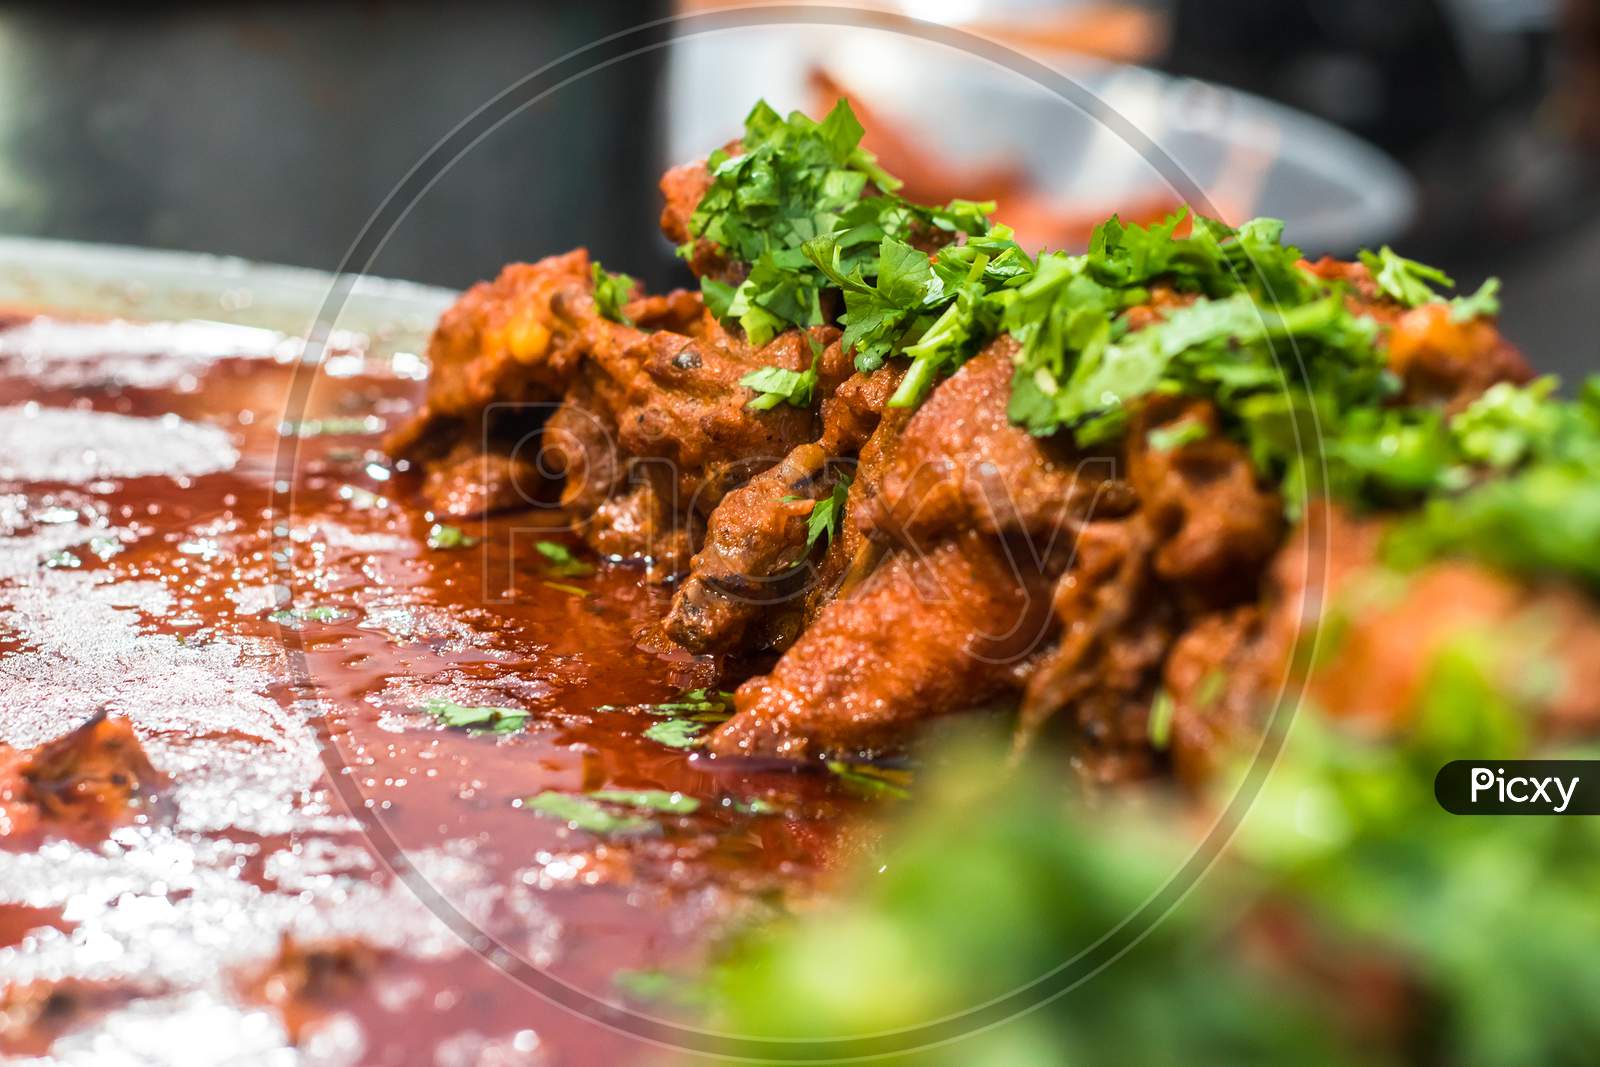 Indian Style Roasted Chicken Or Tandoori Chicken Garnished With Mint Leaves . Indian Non Vegetarian Food. - Imageindian Style Roasted Chicken Or Tandoori Chicken With Spicy Delicious Gravy, Indian Non Vegetarian Food. - Image